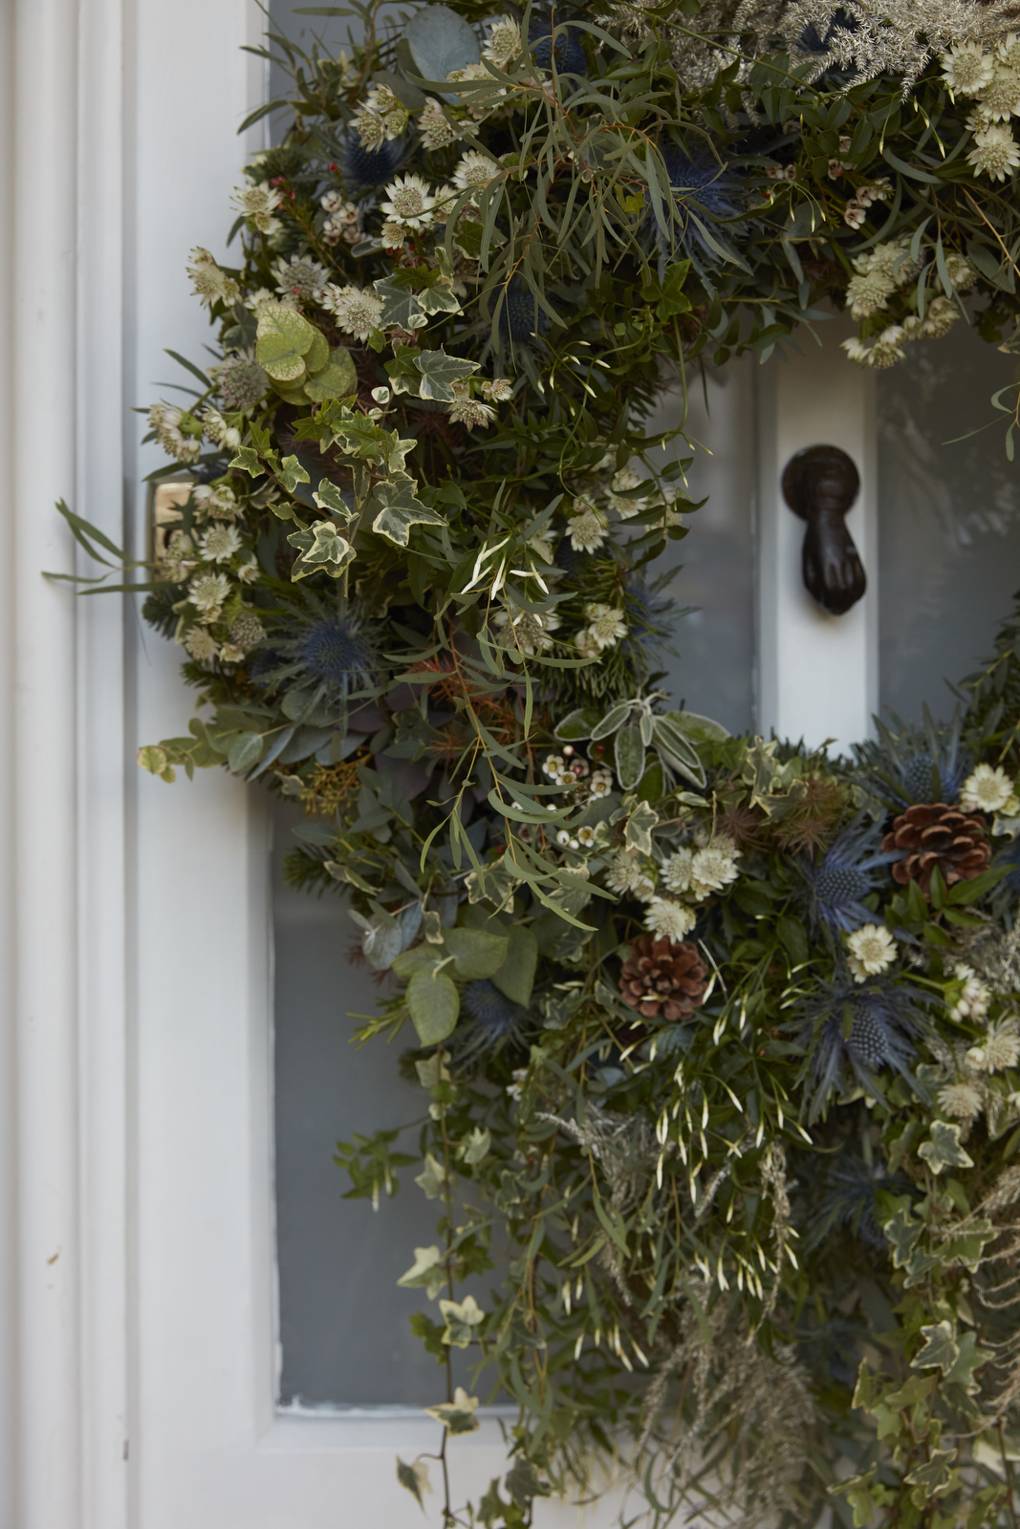 Curious How To Create a Feeling of Elegance With Warm and Durable Materials - Philippa Craddock - Bloom's christmas trend article on Thursd